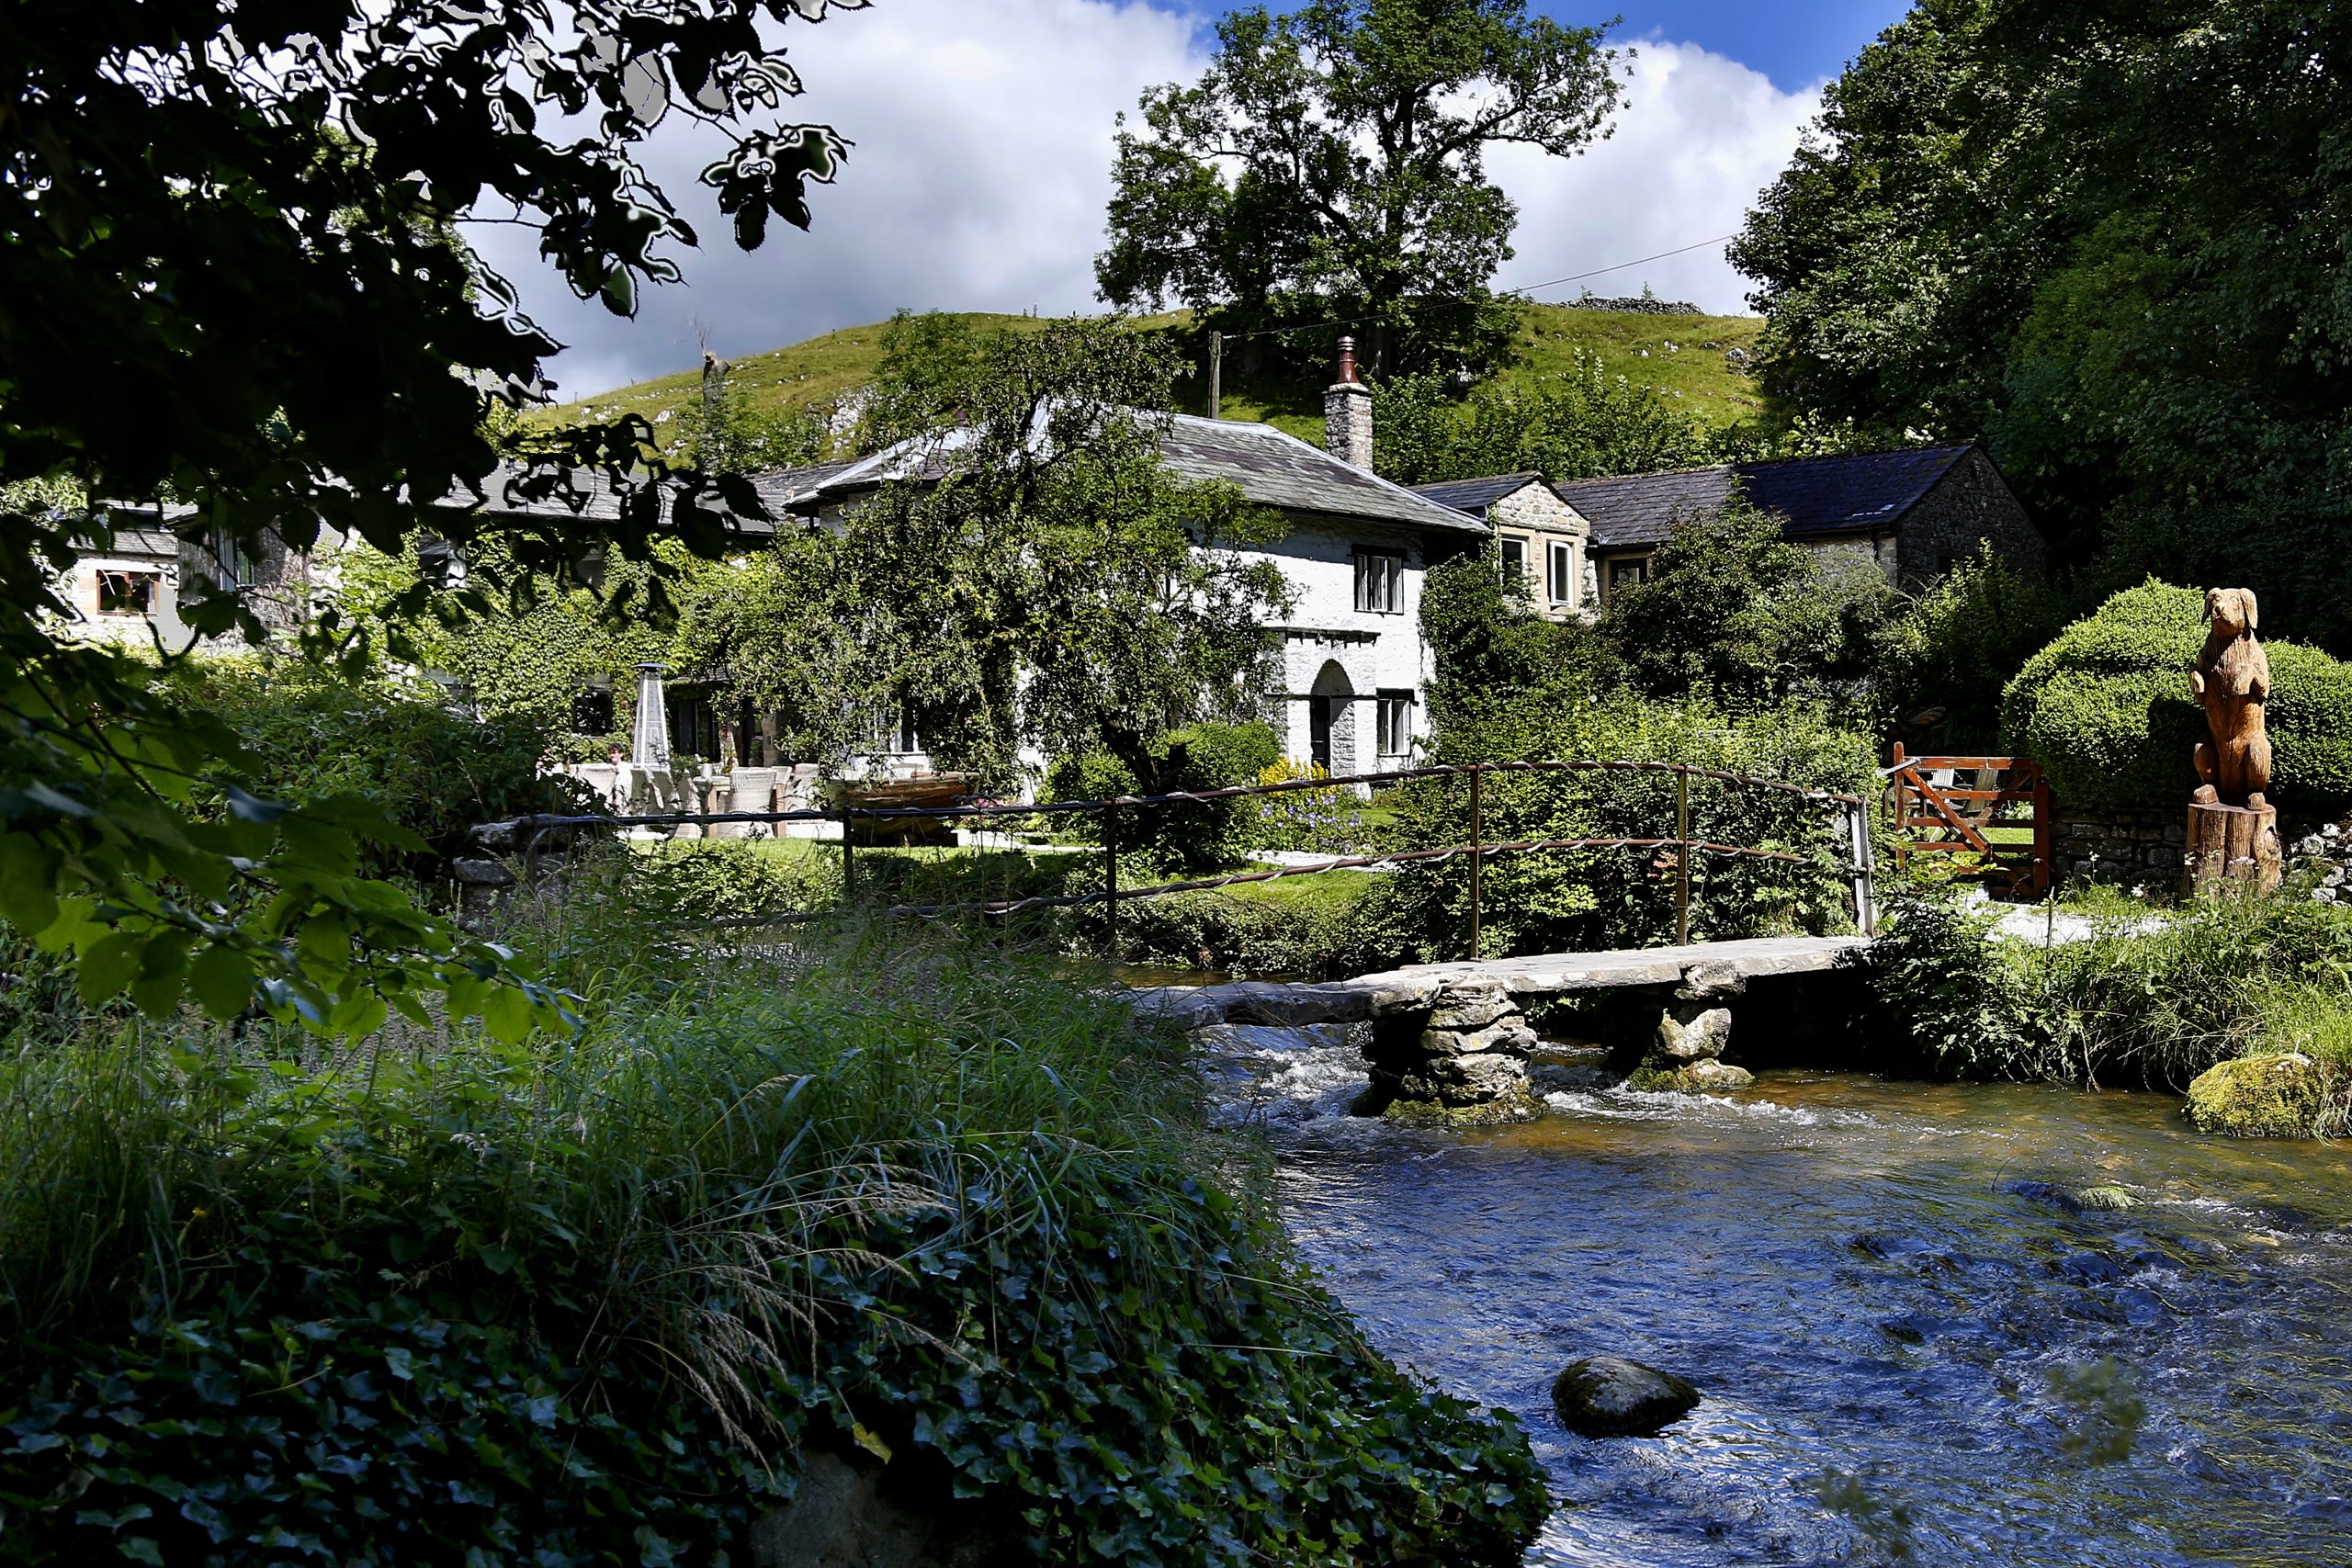 Beck Hall in Malham is England's first vegan hotel